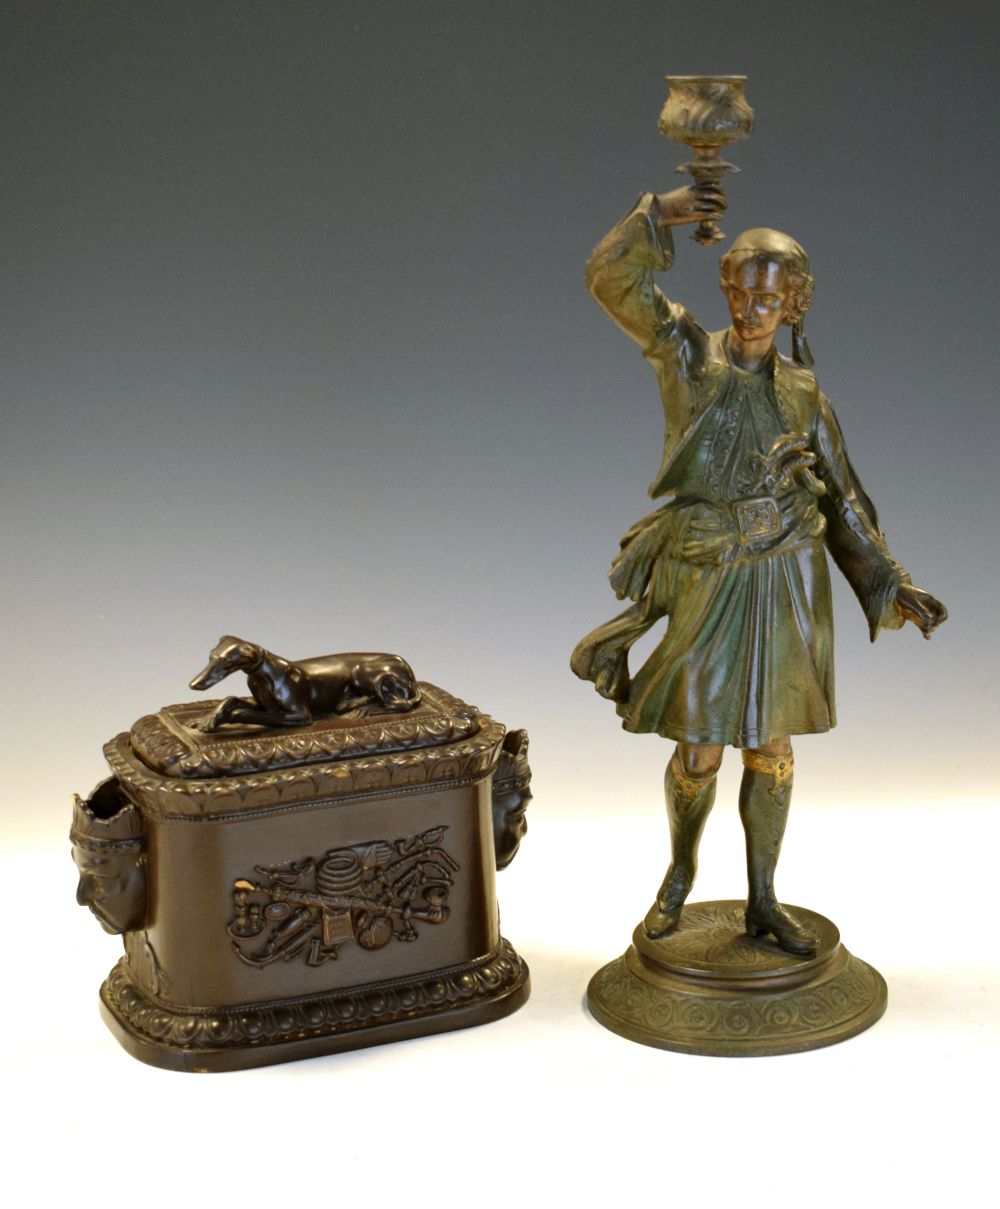 Late 19th Century spelter figural candlestick modelled as a Turk, 37cm high, together with a 19th